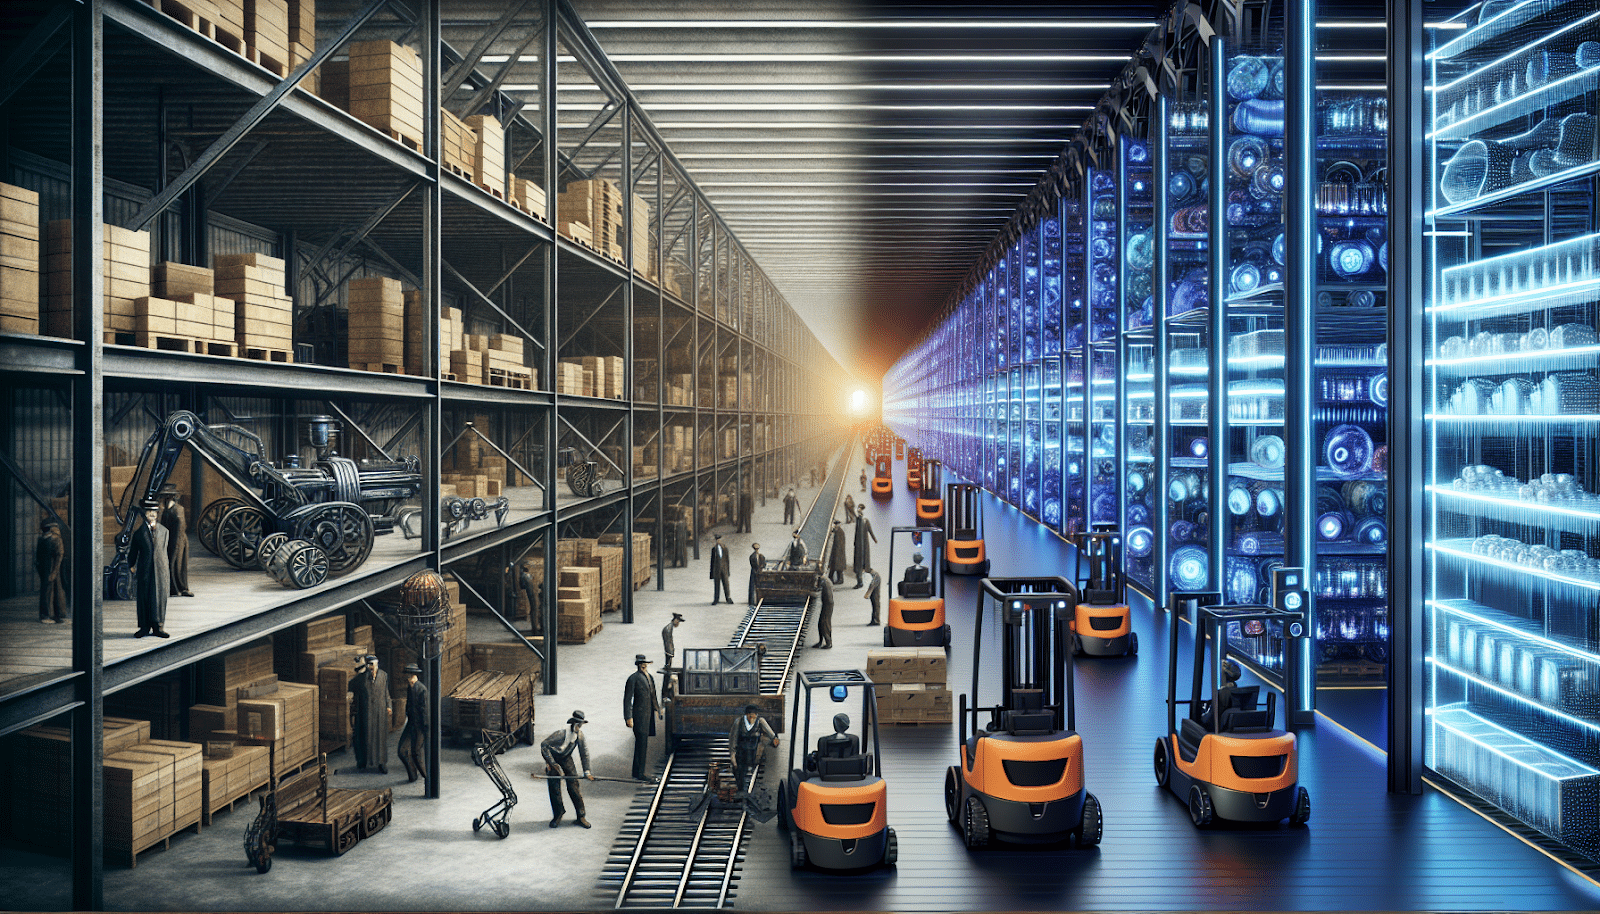 Evolution of warehouse automation from early 1900s to 21st century